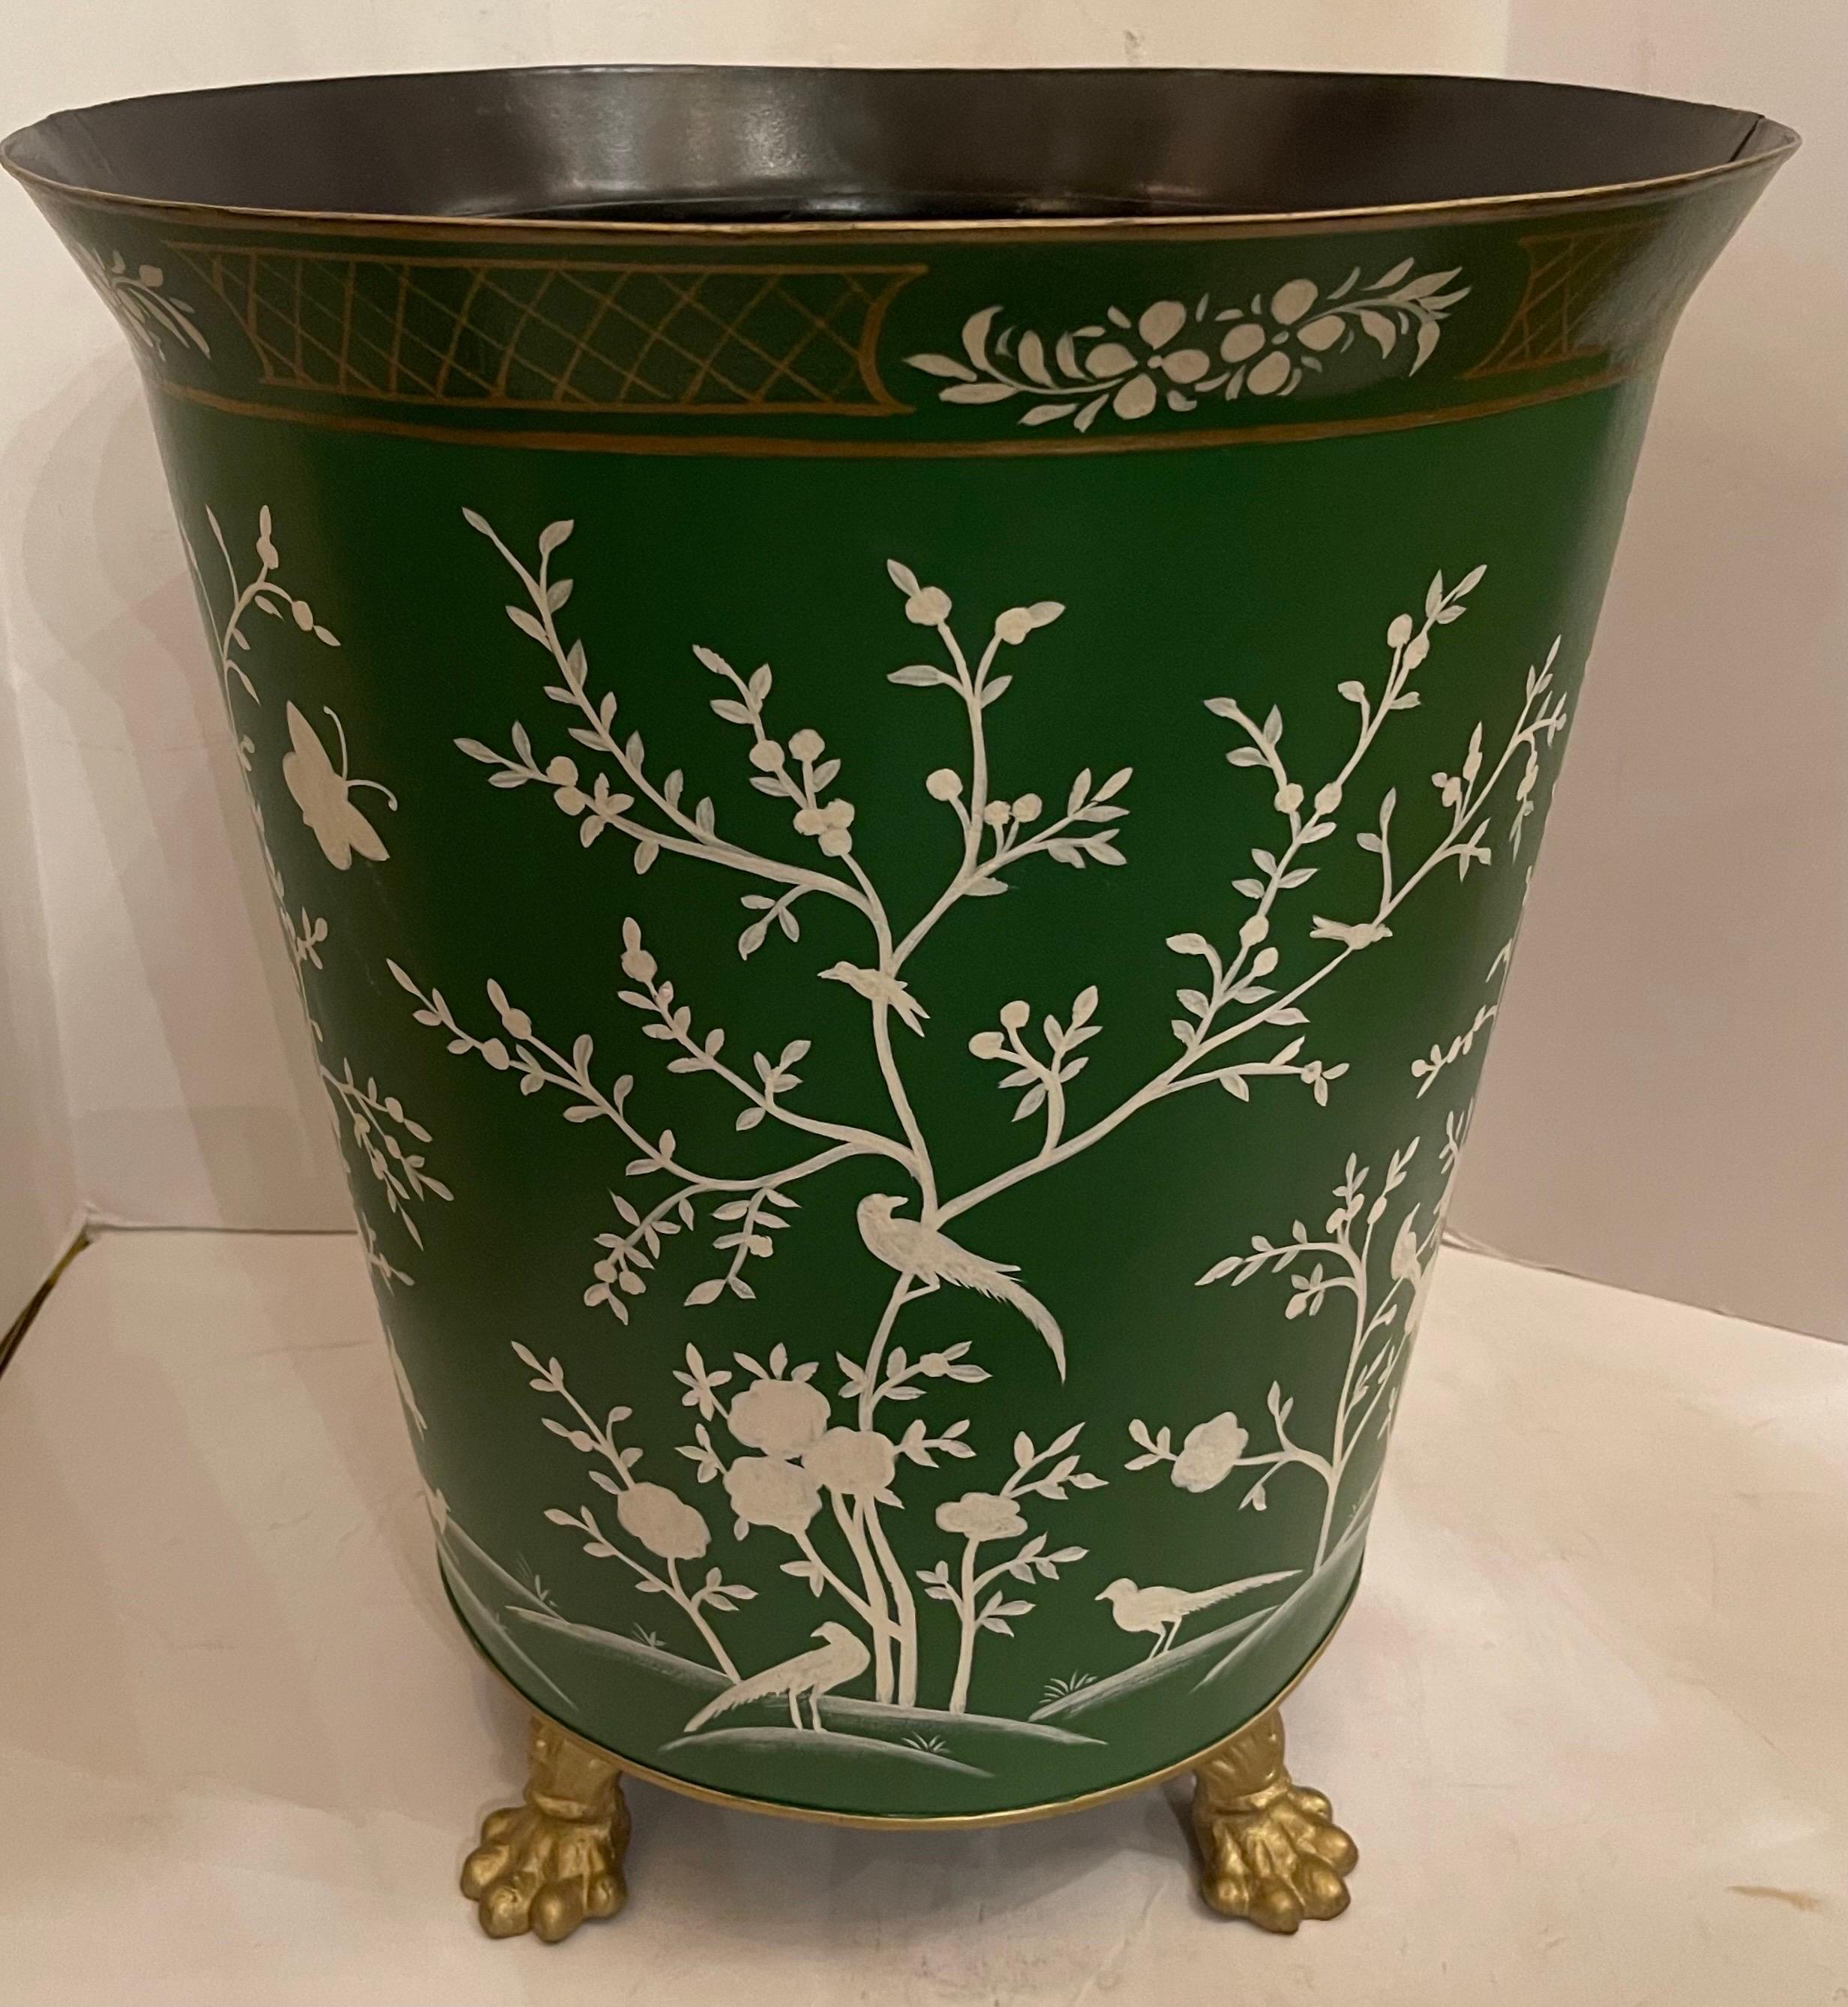 A Wonderful Pair Tole Hand Painted Chinoiserie Moss Green And White Large Planters Raised On Gold Gilt Paw Feet.